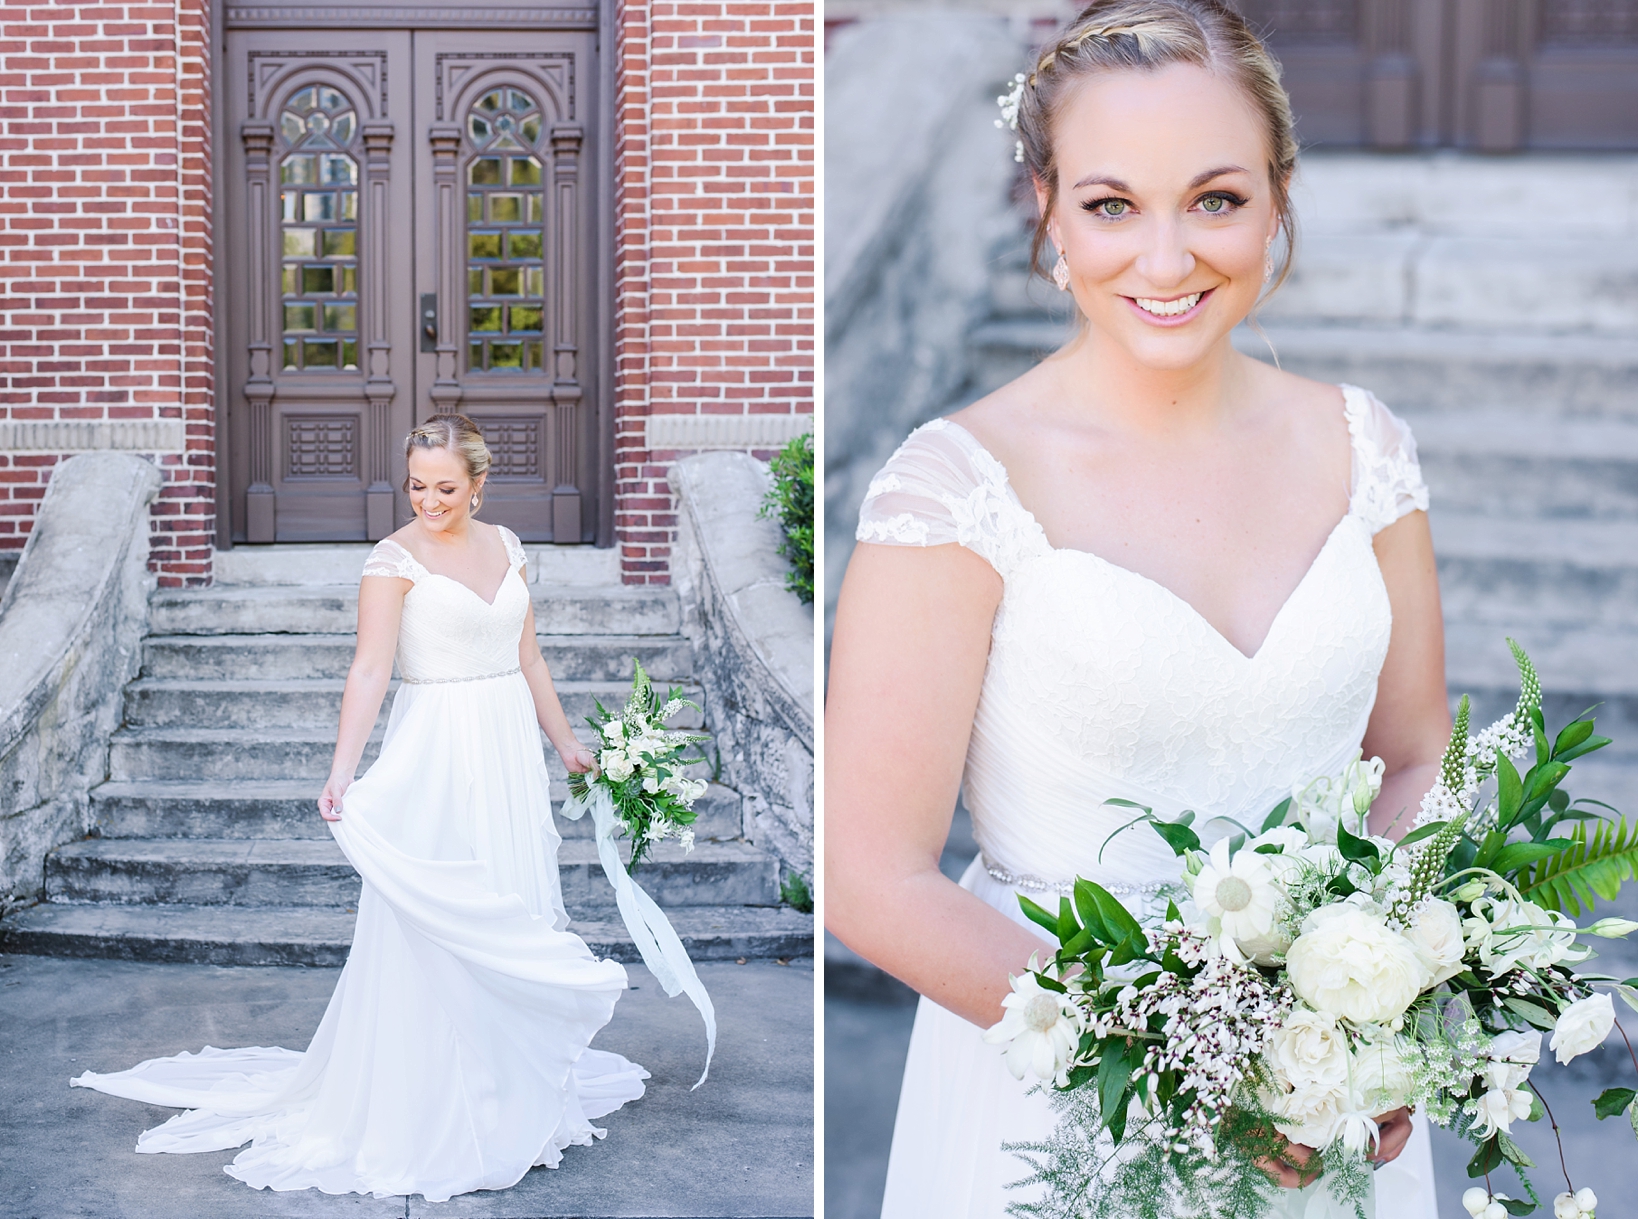 Bride portraits with her floral bouquet and playing with the train of her dress